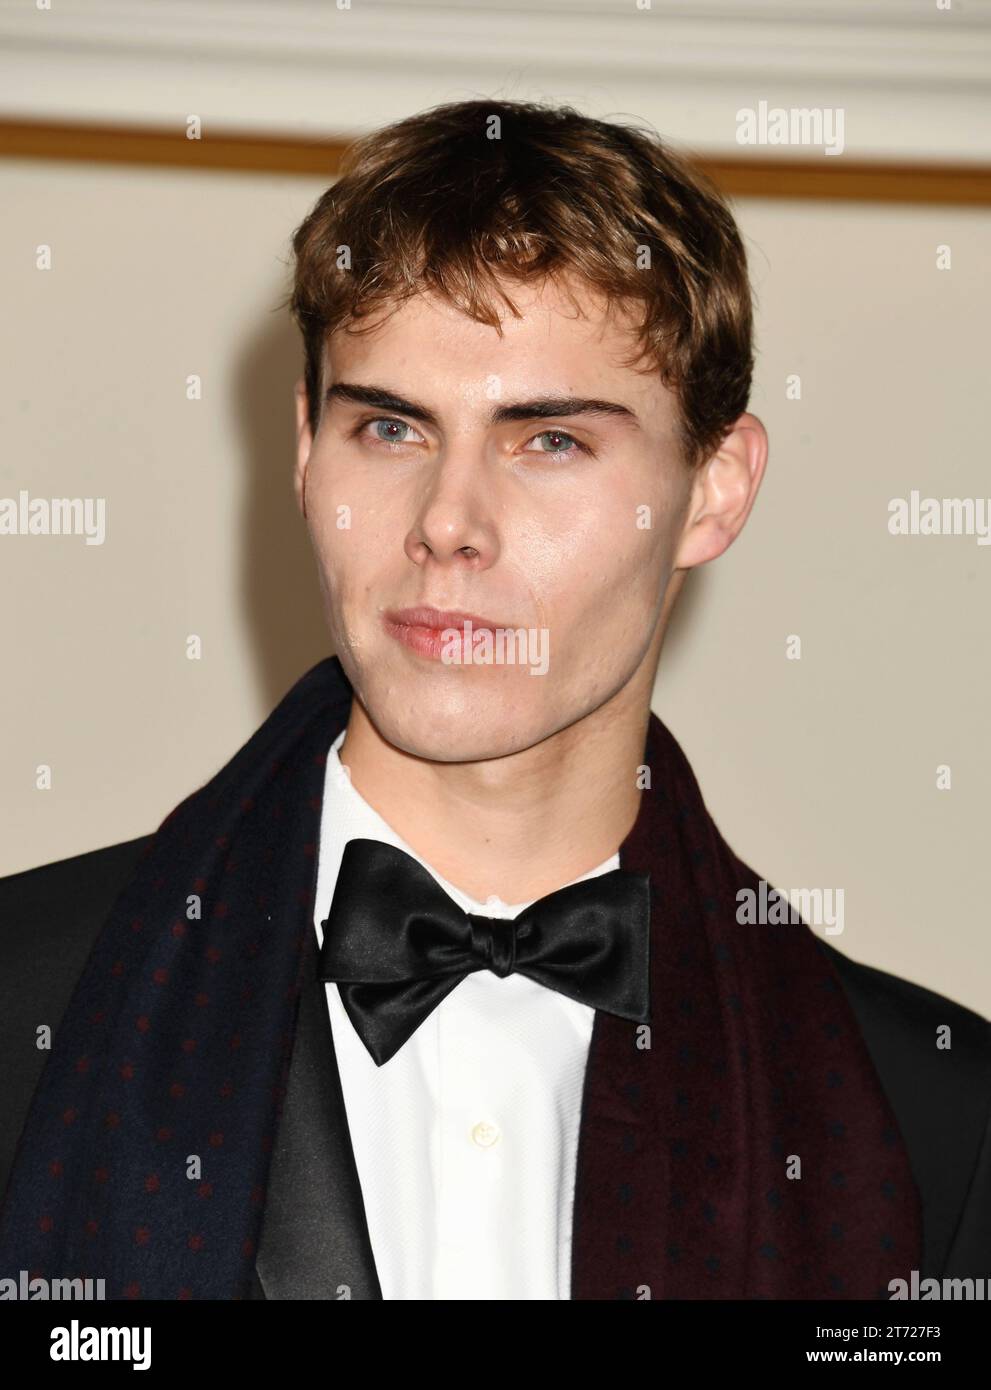 Los Angeles, California, USA. 12th Nov, 2023. Rufus Kampa attends the premiere of Netflix's 'The Crown' Season 6 Part 1 at Regency Village Theatre on November 12, 2023 in Los Angeles, California. Credit: Jeffrey Mayer/Jtm Photos/Media Punch/Alamy Live News Stock Photo